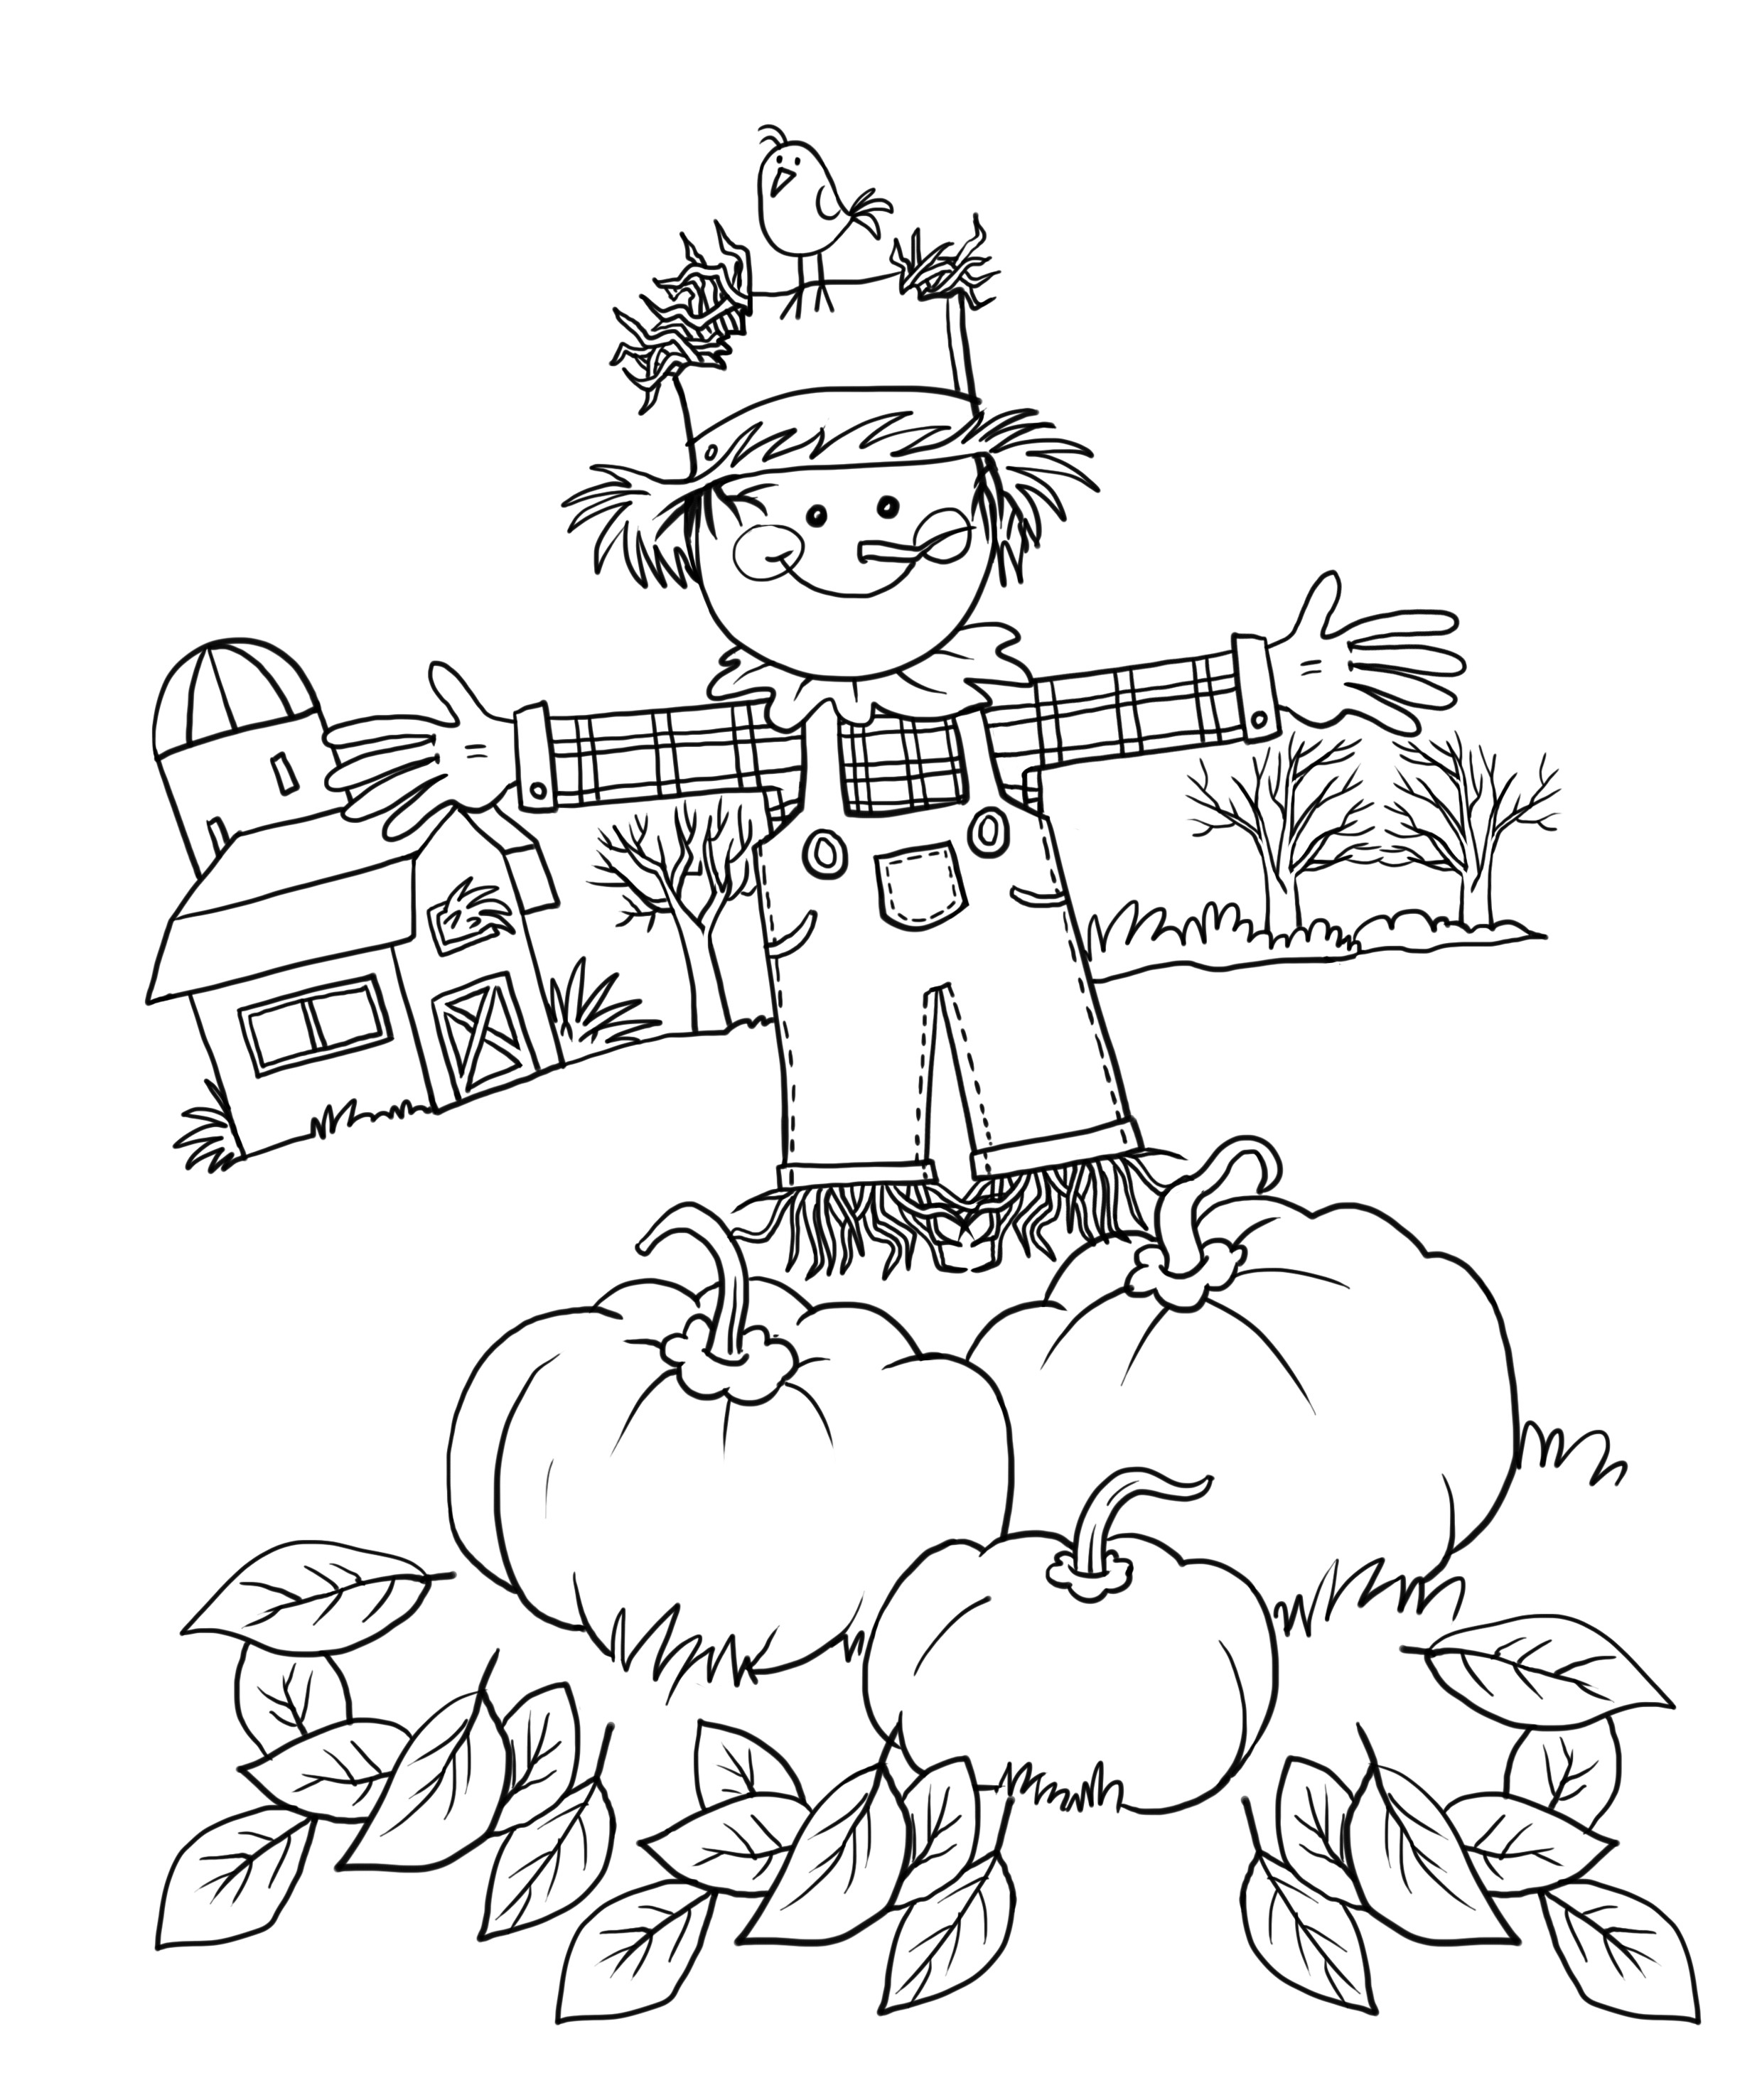 Stress Free Autumn Coloring Sheets For Kids
 Fall Coloring Pages